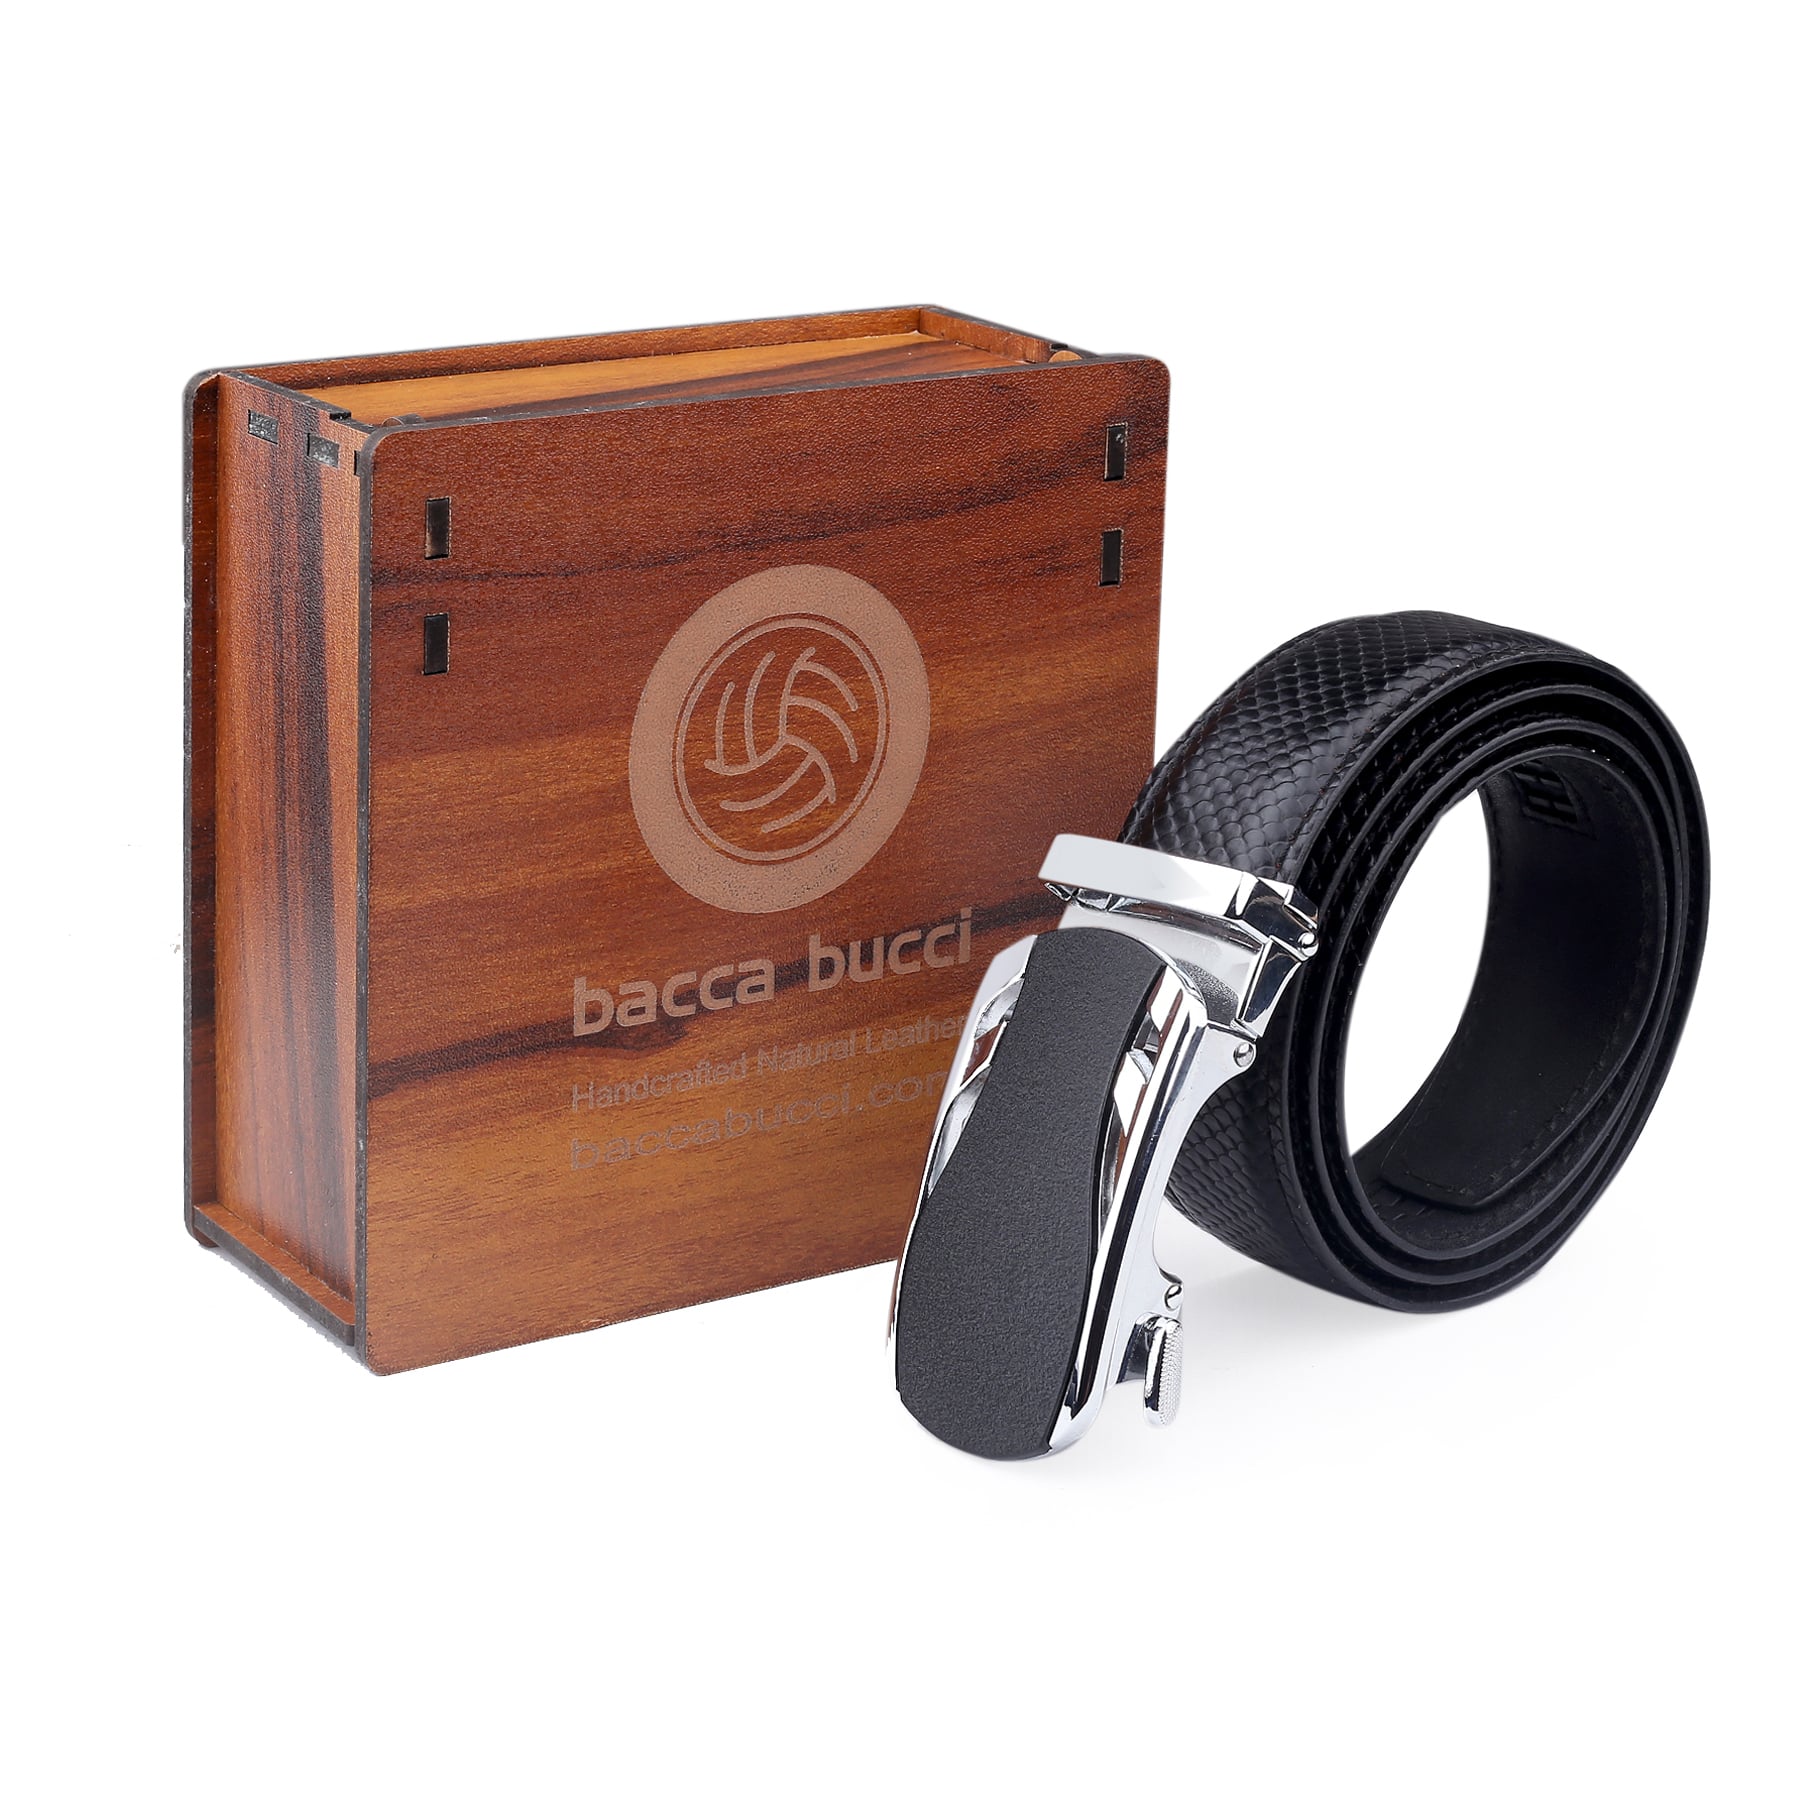 Bacca Bucci Premium Leather Formal Dress Belts with a Stylish Finish & a Auto Lock Nickel-Free Buckle